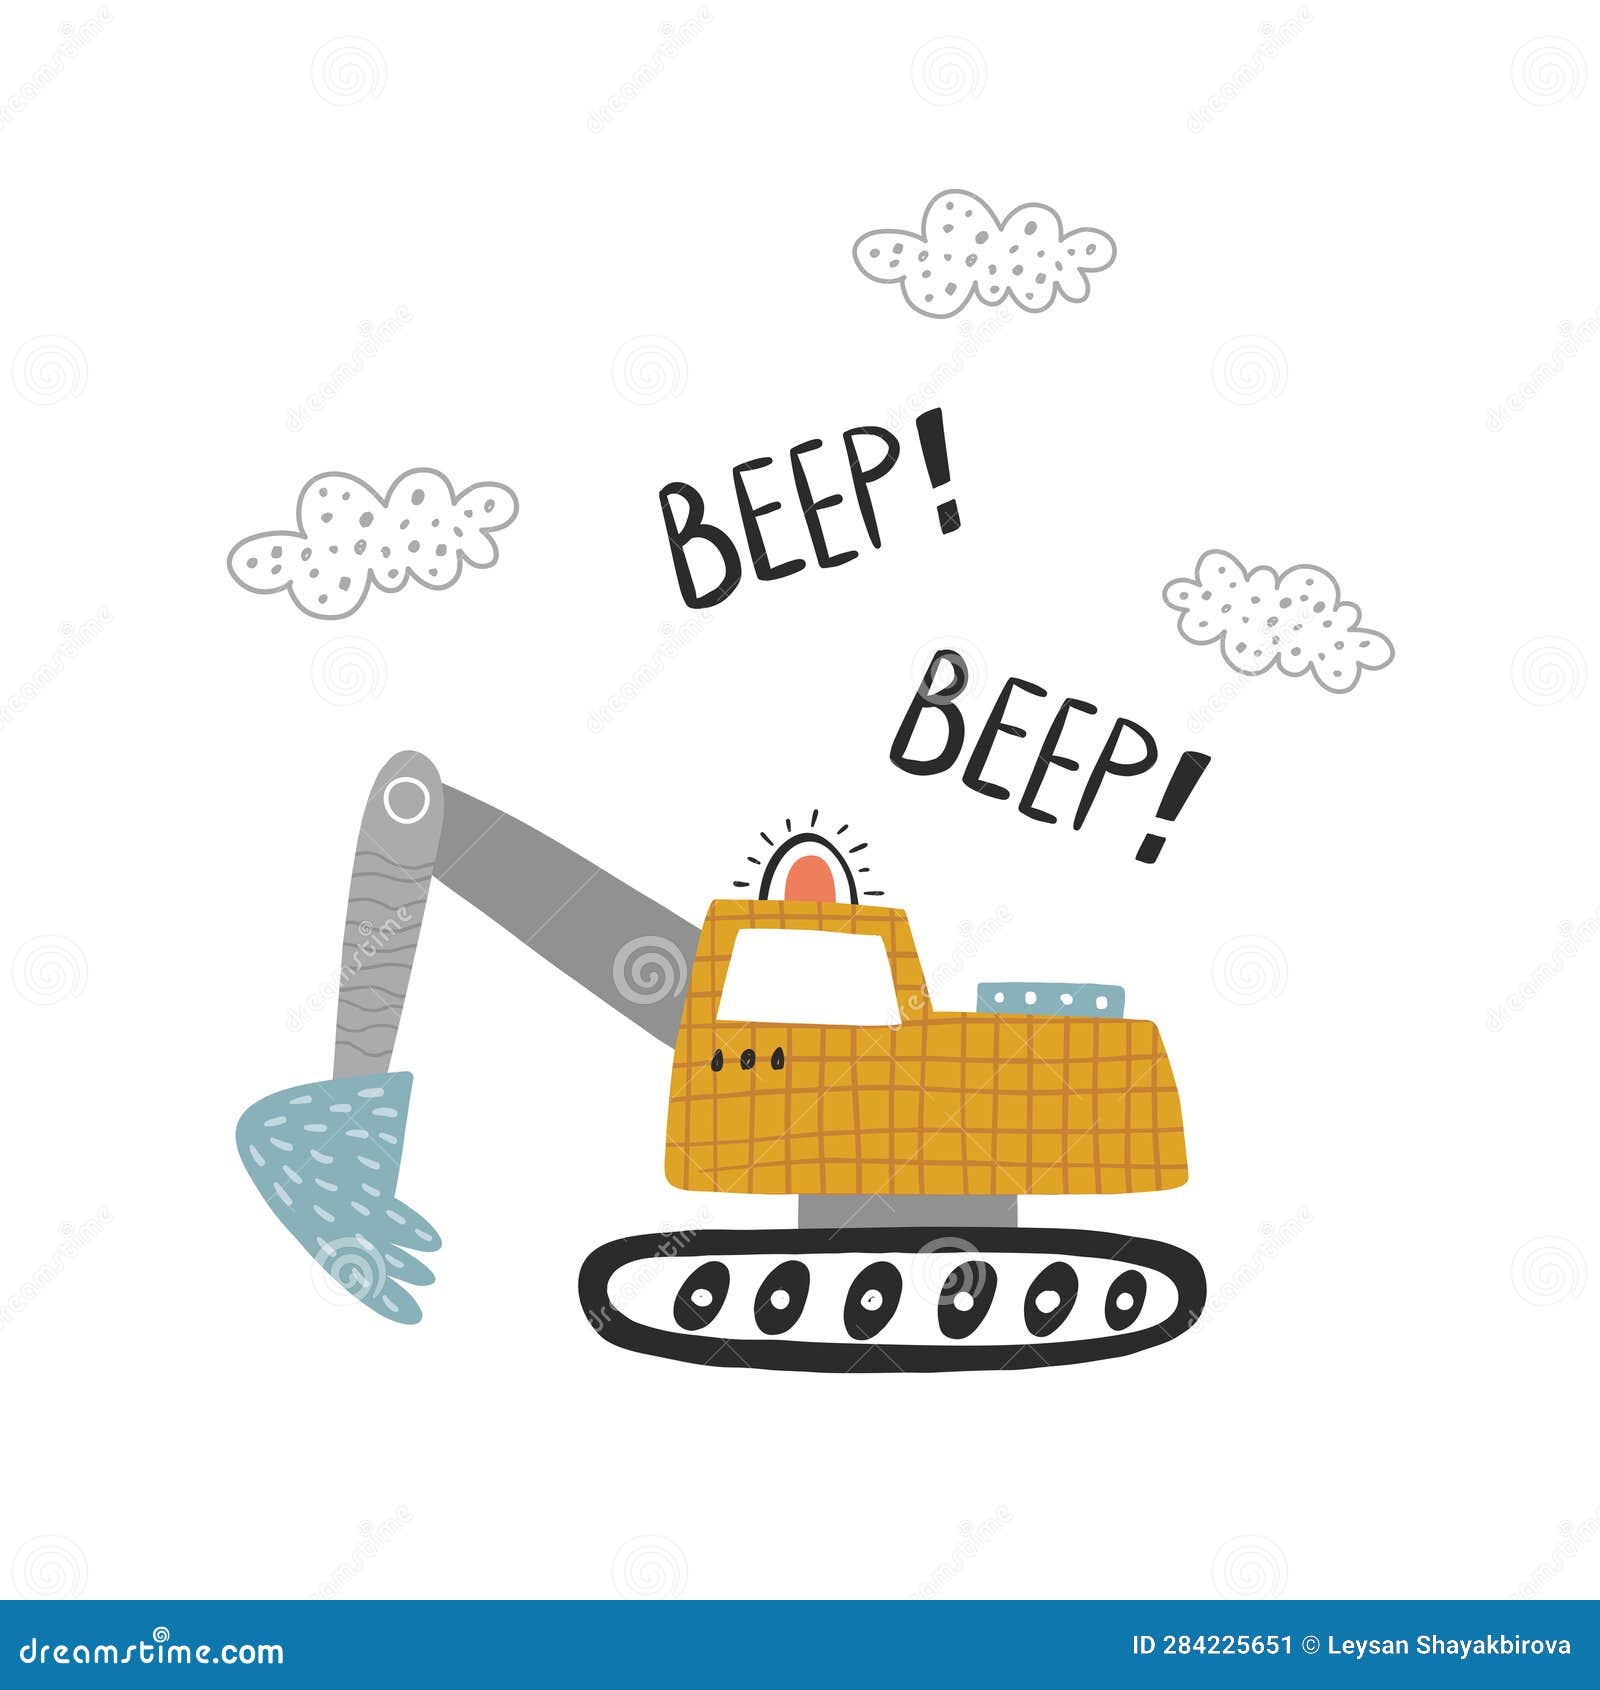  image of cute excavator and beep text